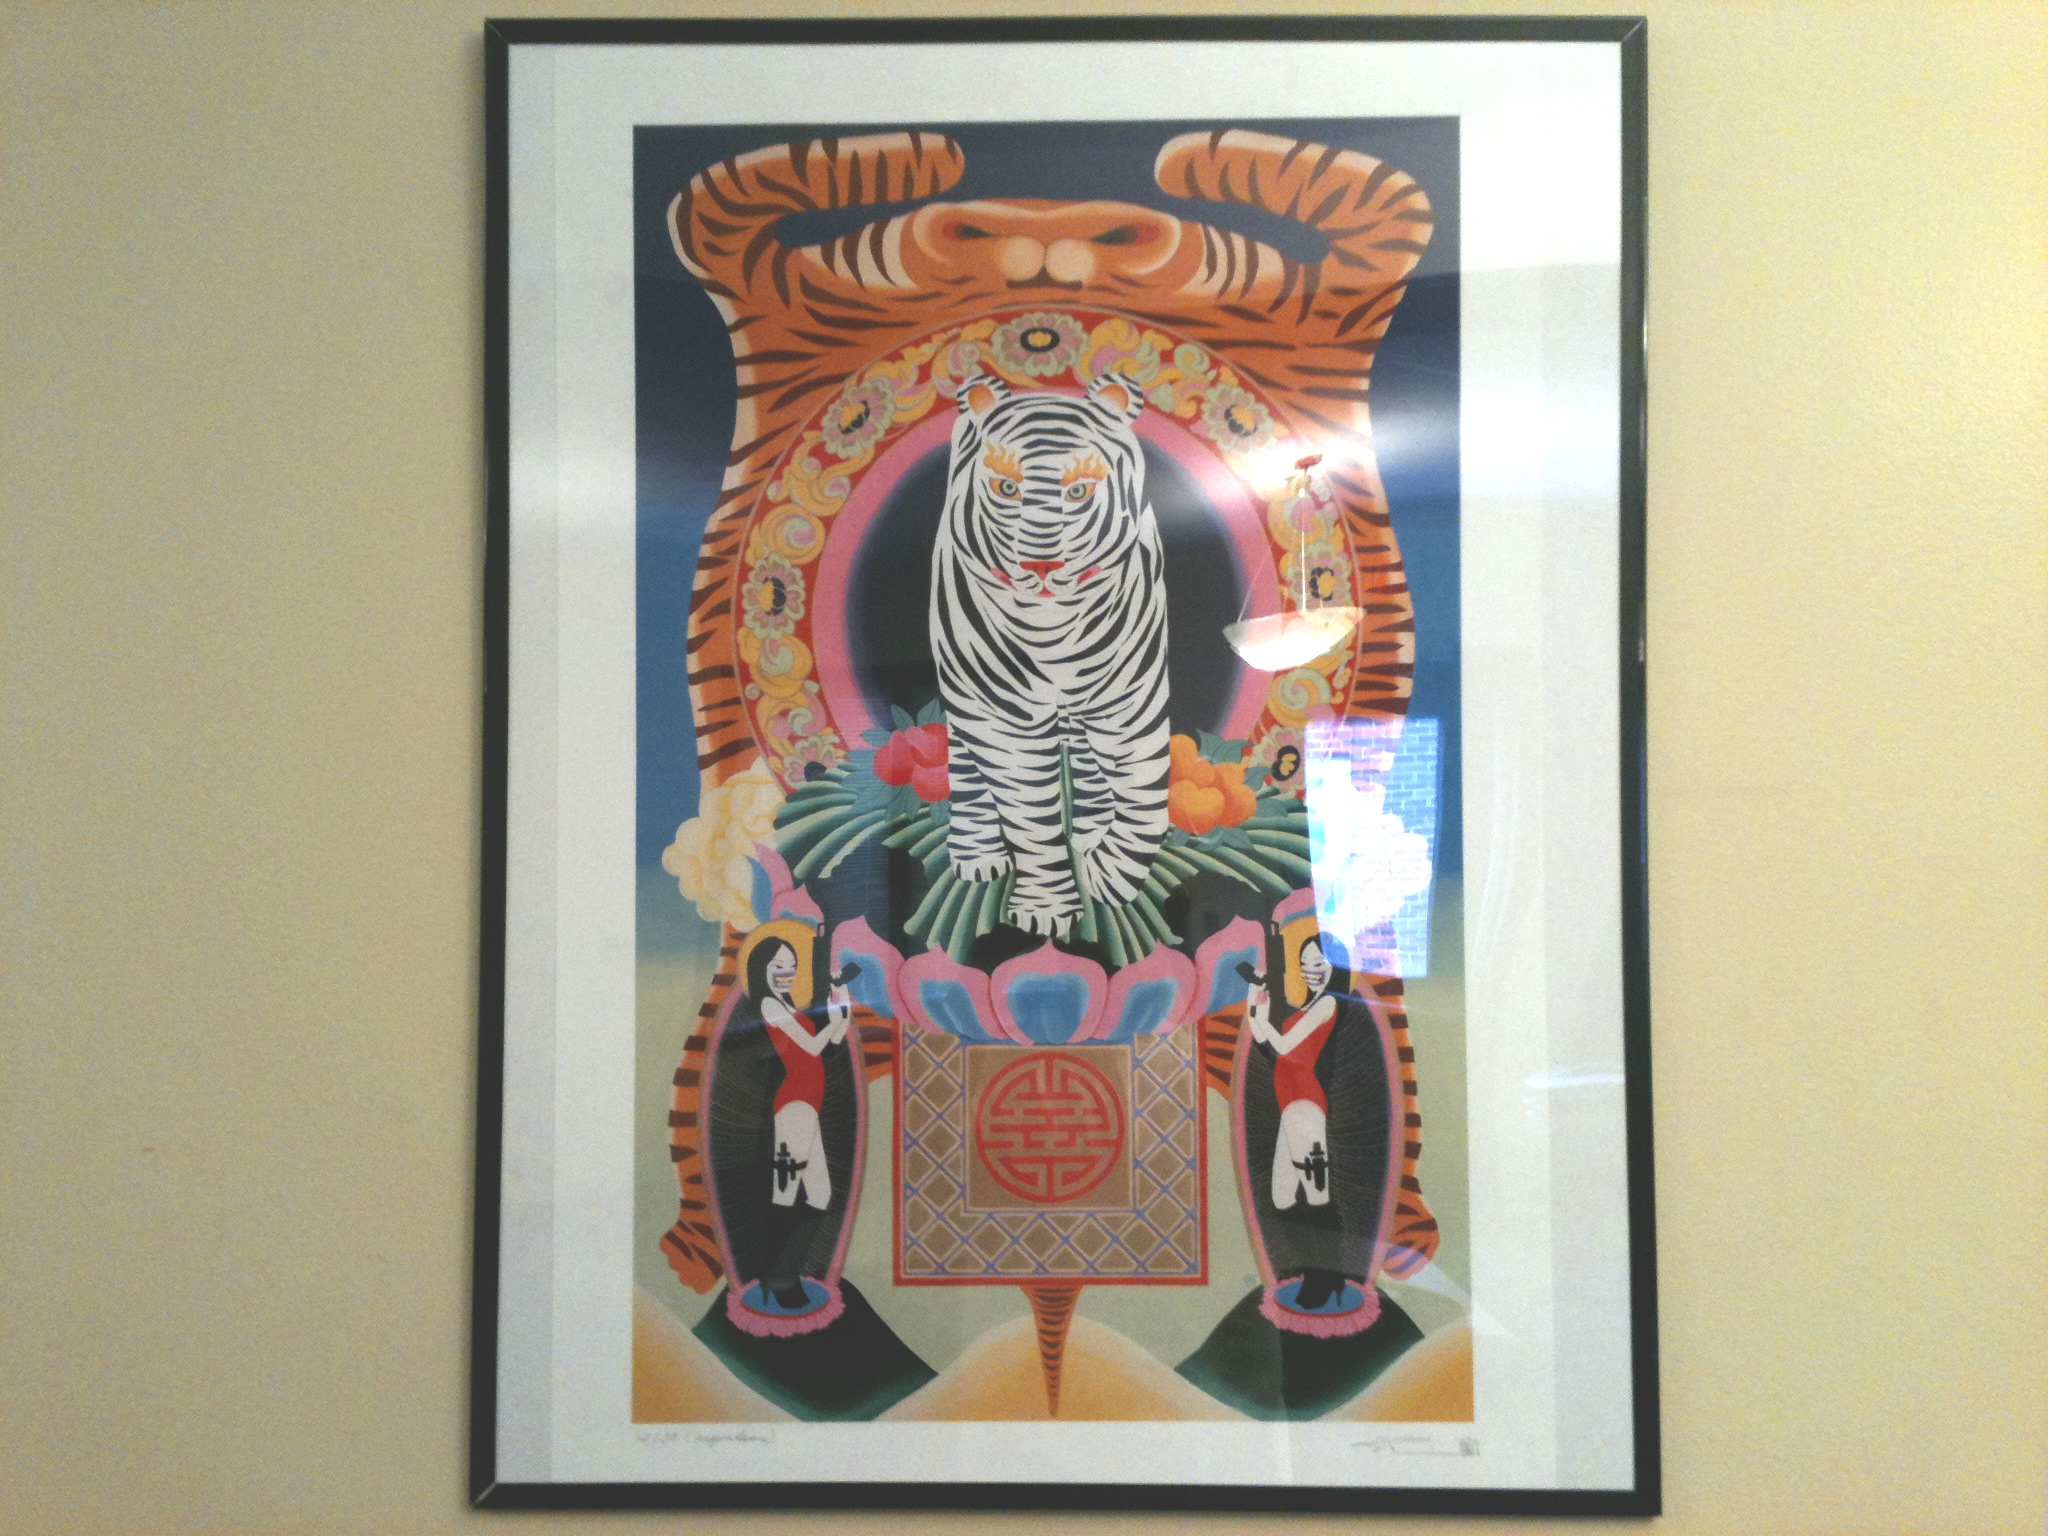 Painting of symmetrical pattern featuring tigers and figures